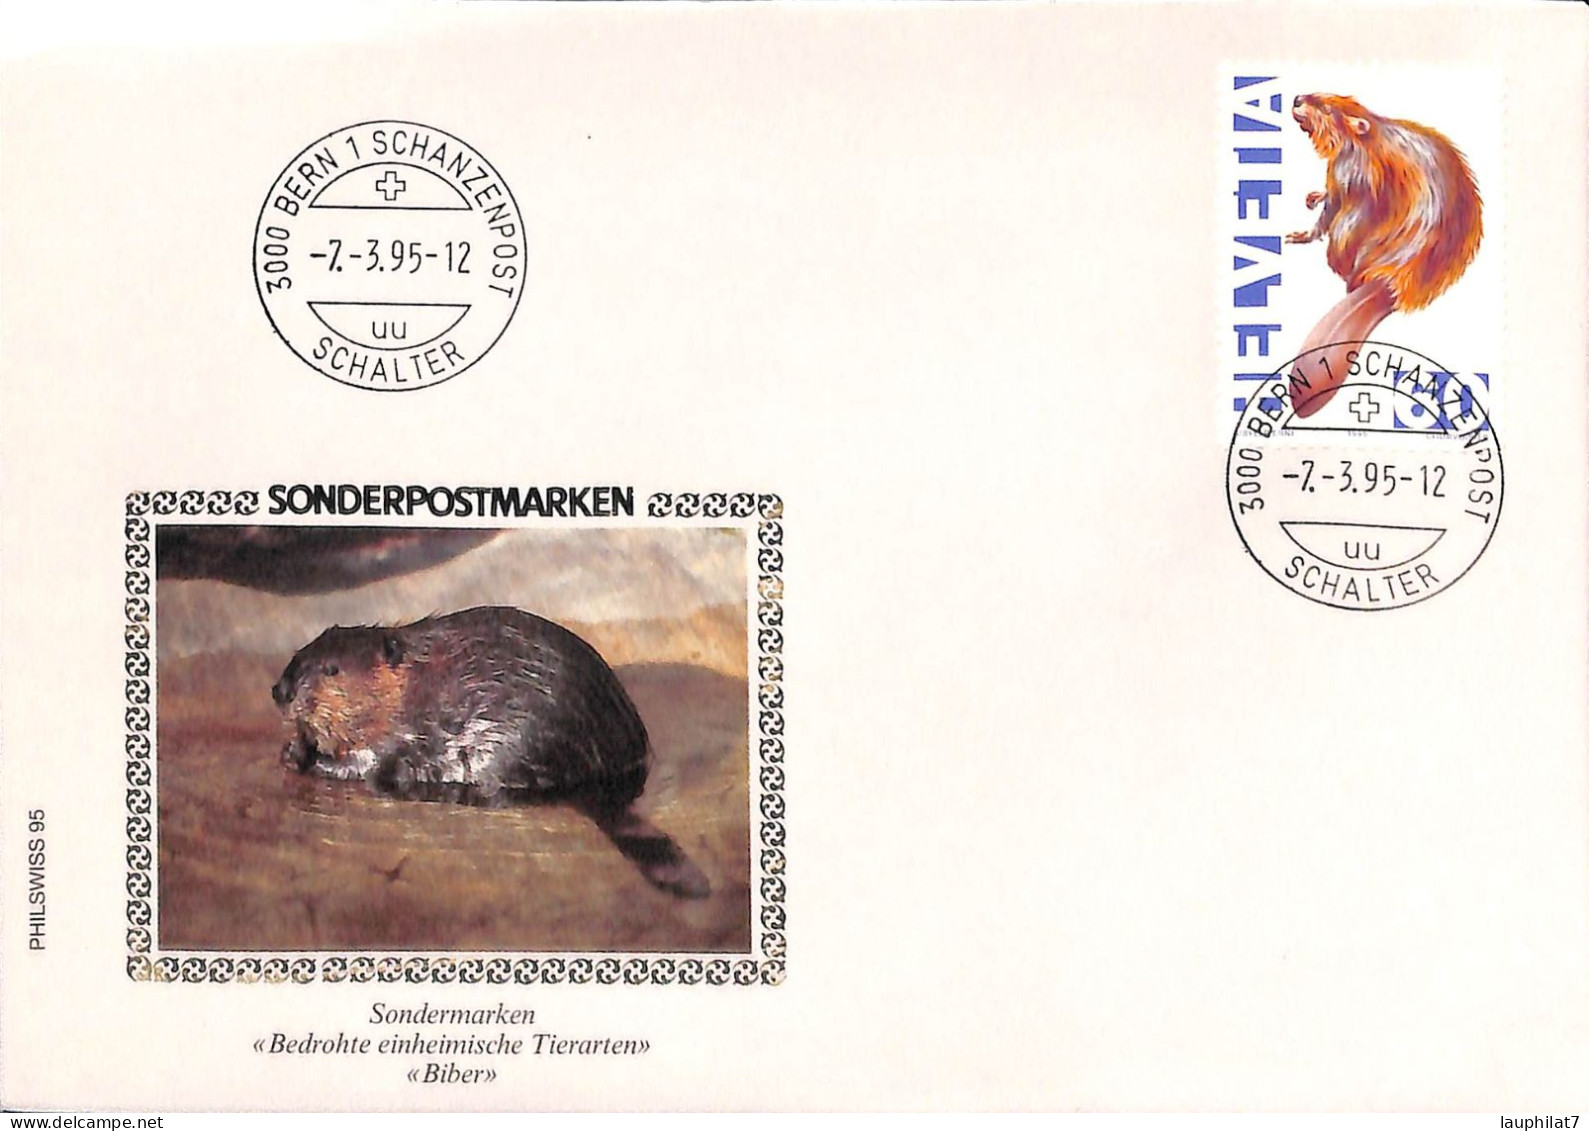 [900105]TB//-Suisse  - FDC, Documents, BERN 1 SCHANZENPOST, Animaux, Rongeurs - Rodents